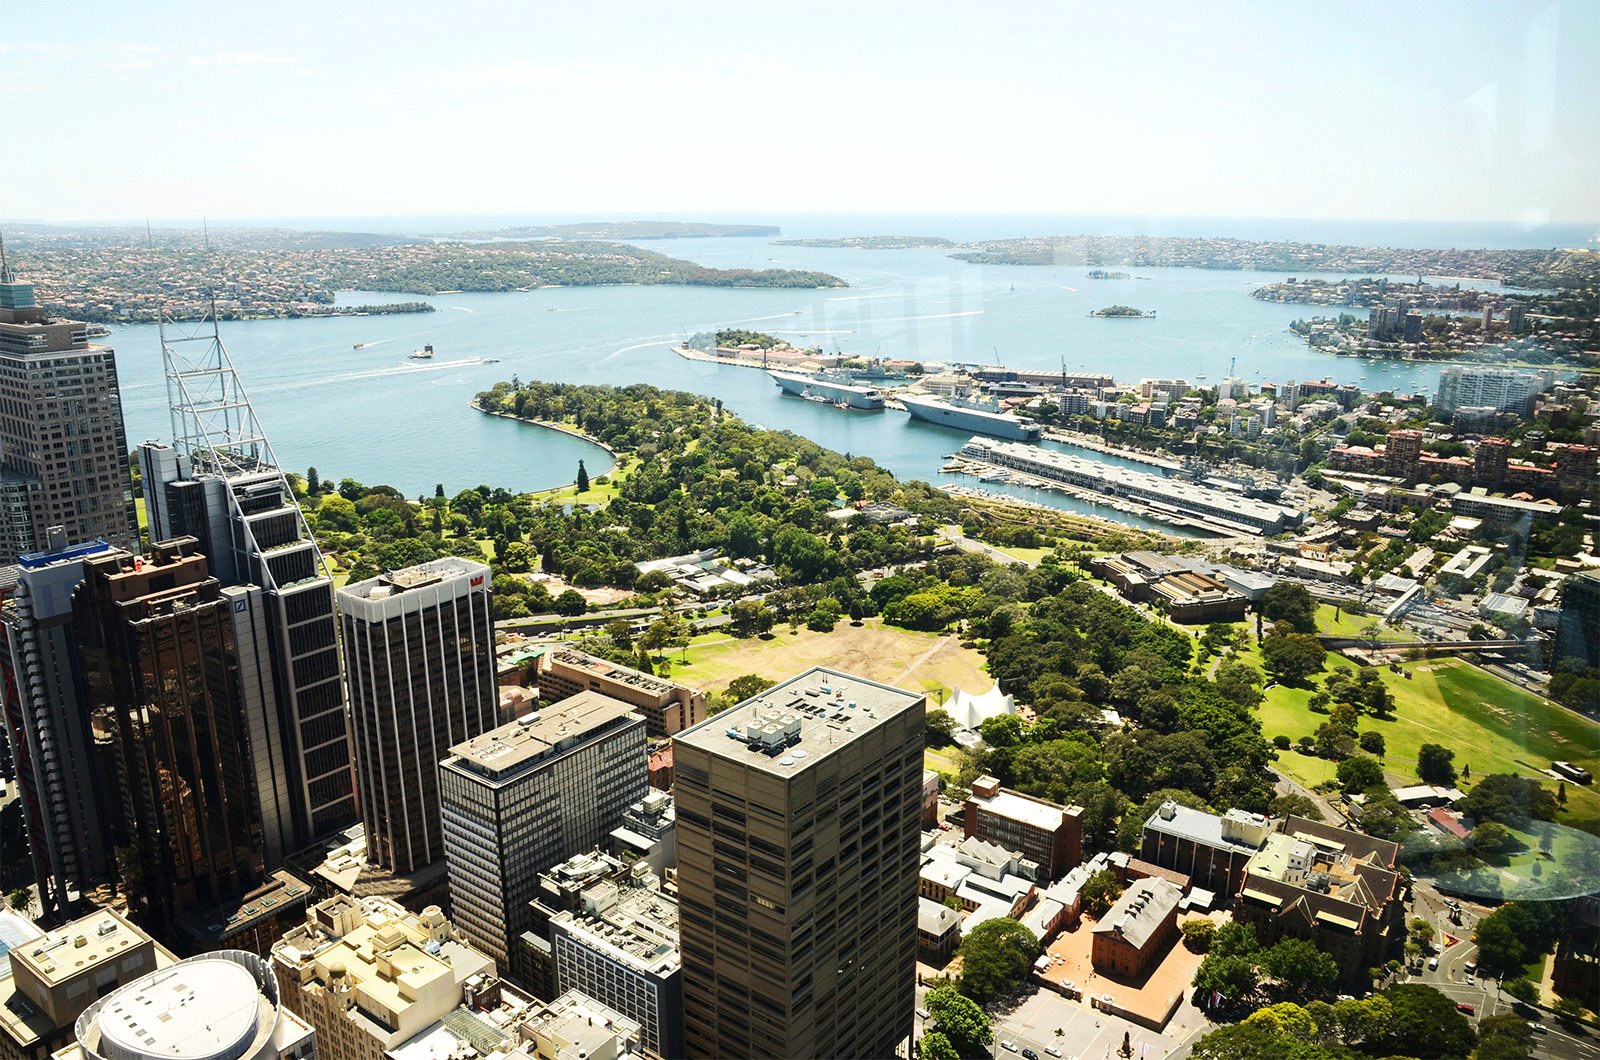 How to come on up to Sydney Tower Eye in Sydney